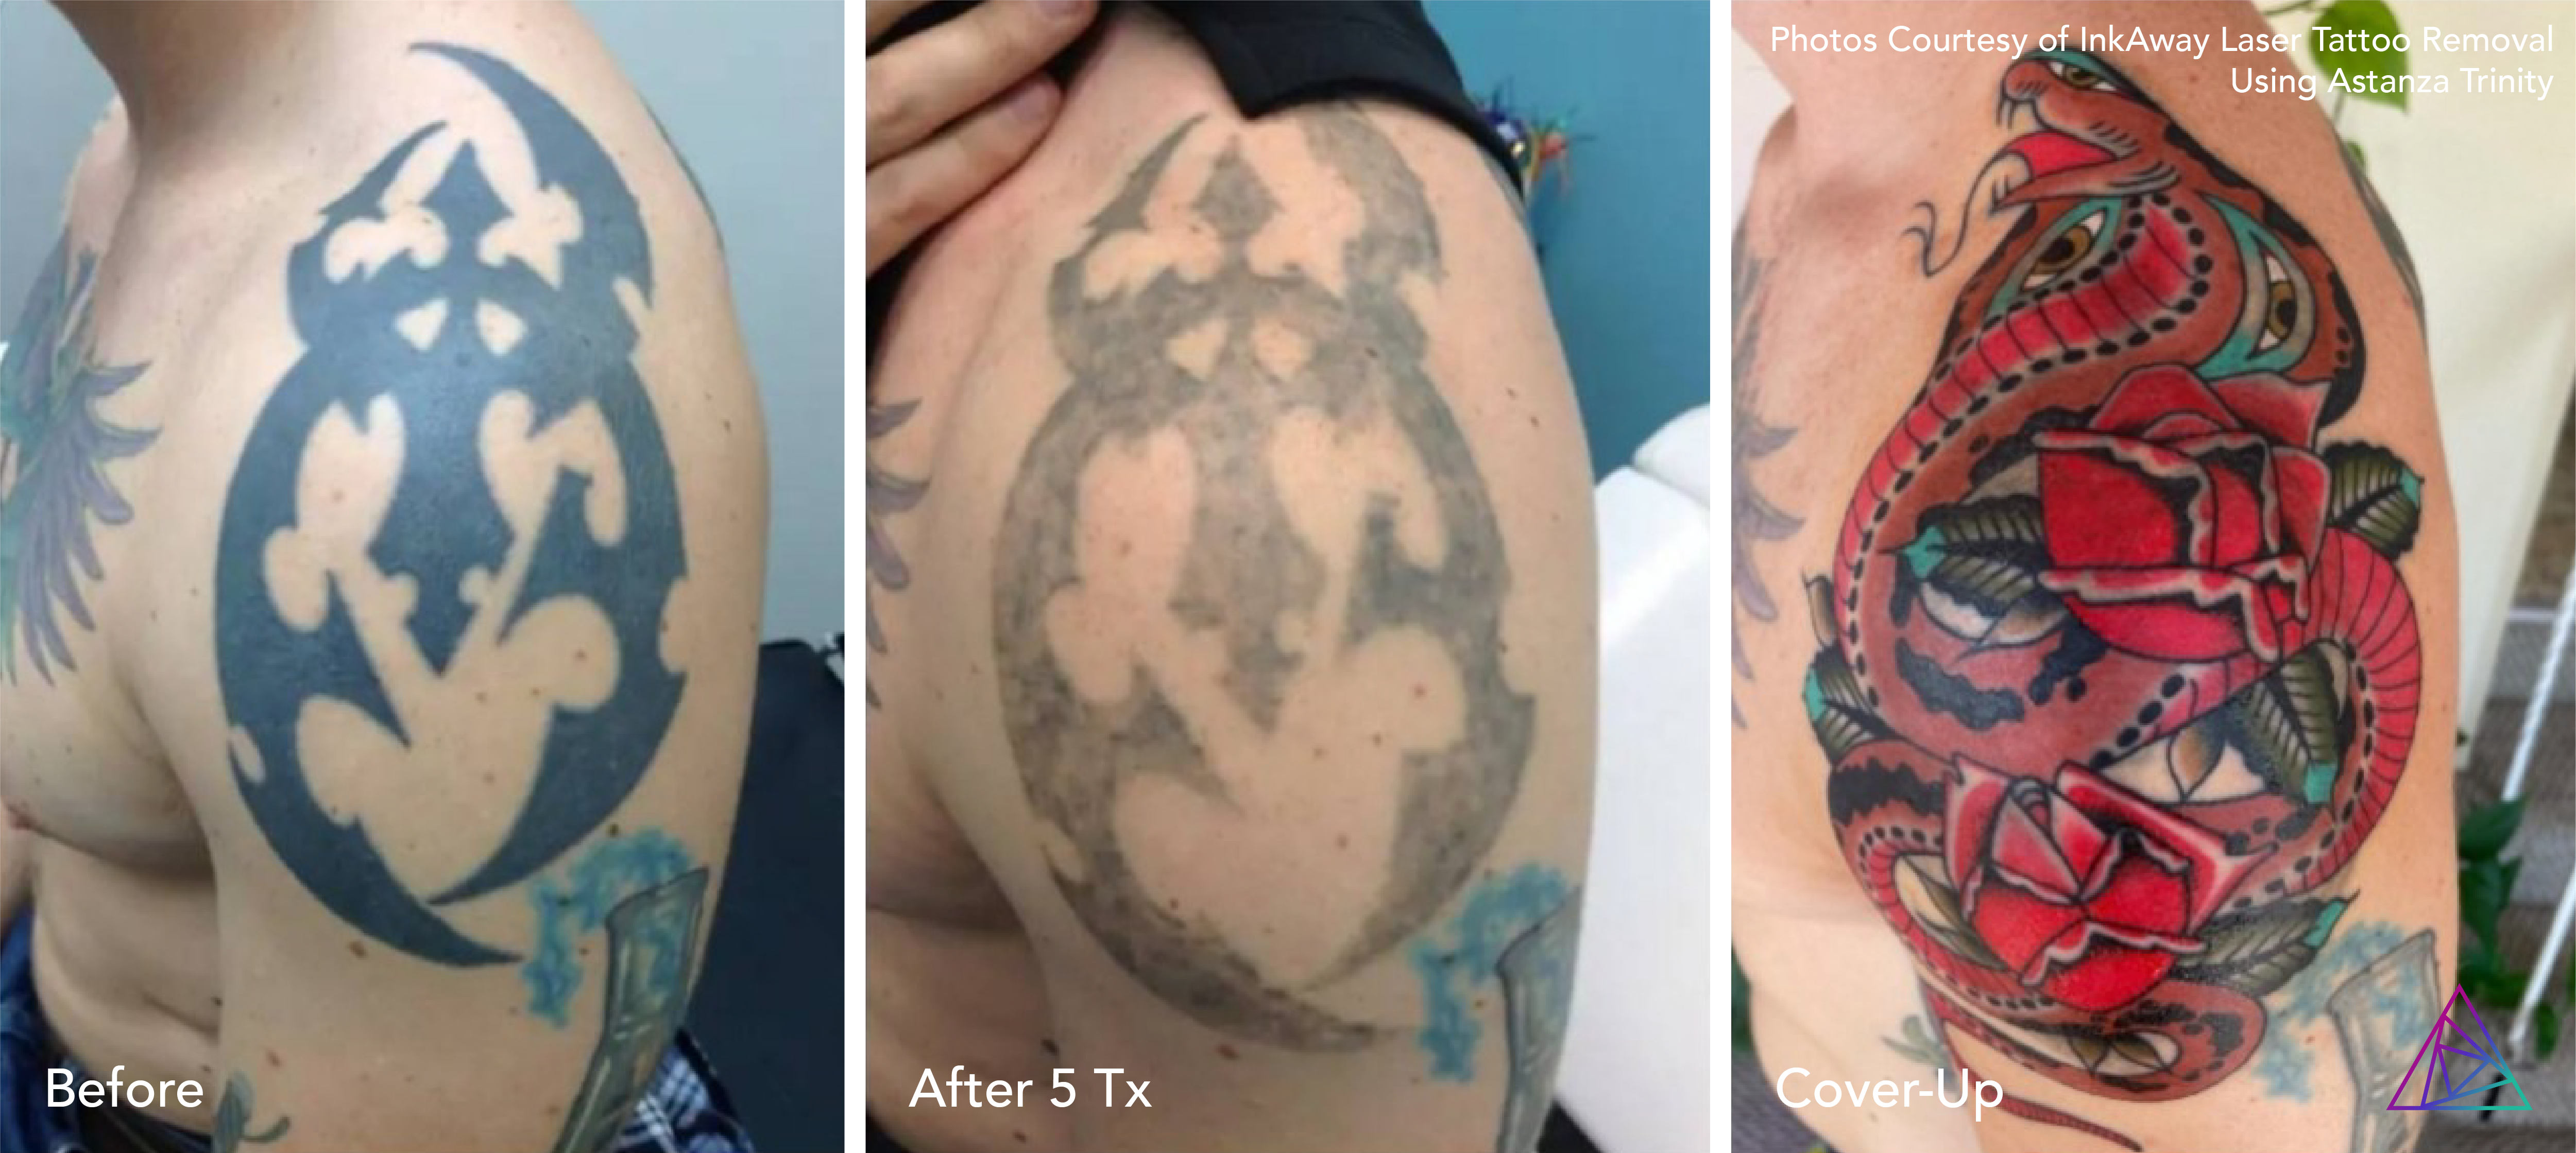 Laser Tattoo Removal Course  HandsOn Training On Live Models